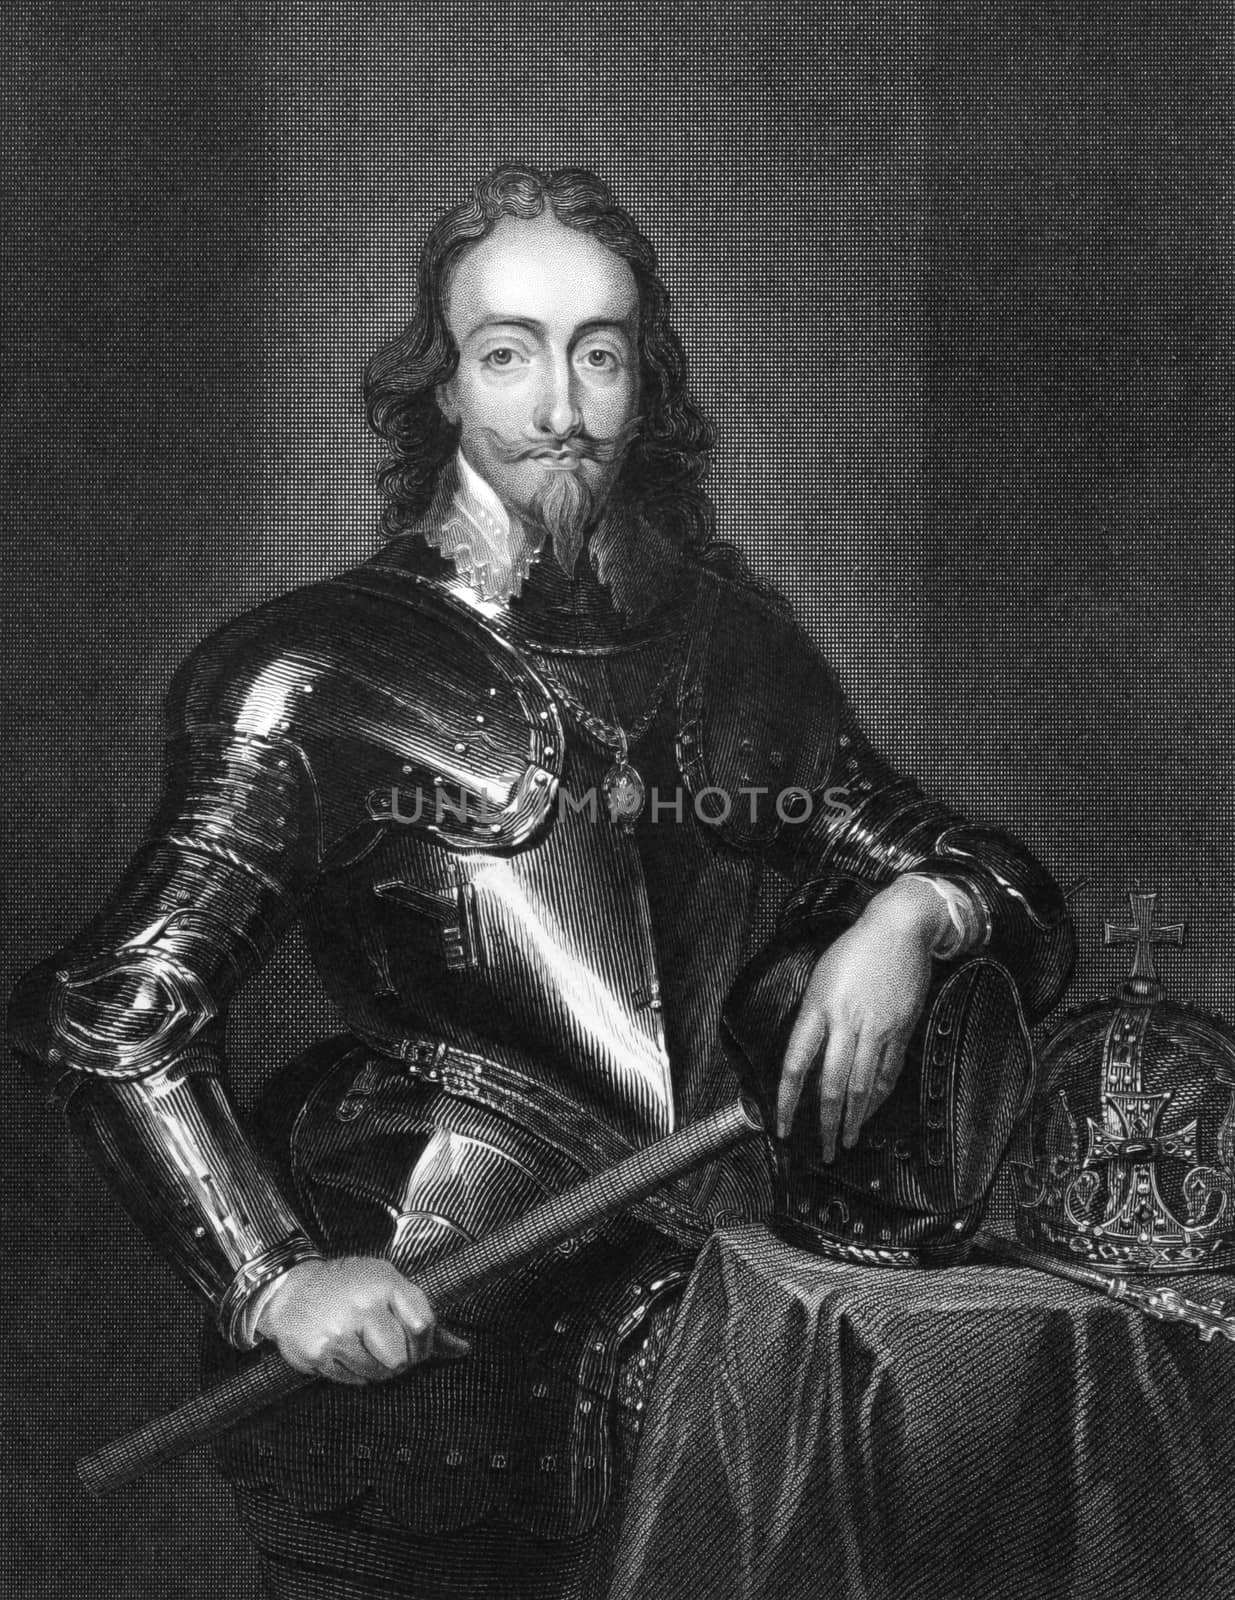 Charles I of England (1600-1649) on engraving from 1831. King of England, Scotland and Ireland from 1625 until his execution. Engraved by H.Robinson and published in ''Portraits of Illustrious Personages of Great Britain'',UK,1831.
